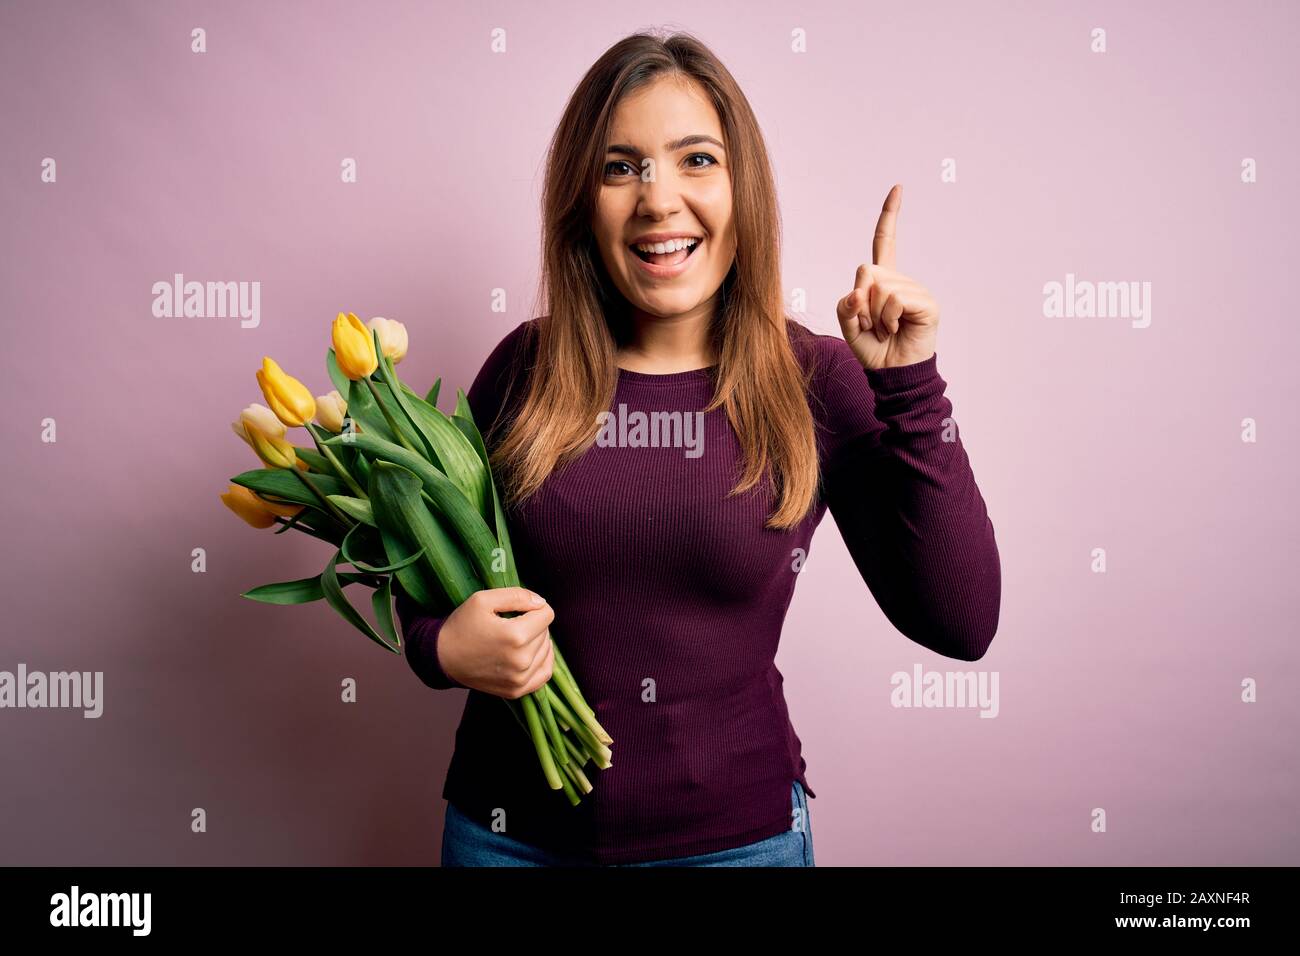 Young blonde woman holding romantic bouquet of yellow tulips flowers over pink background smiling amazed and surprised and pointing up with fingers an Stock Photo